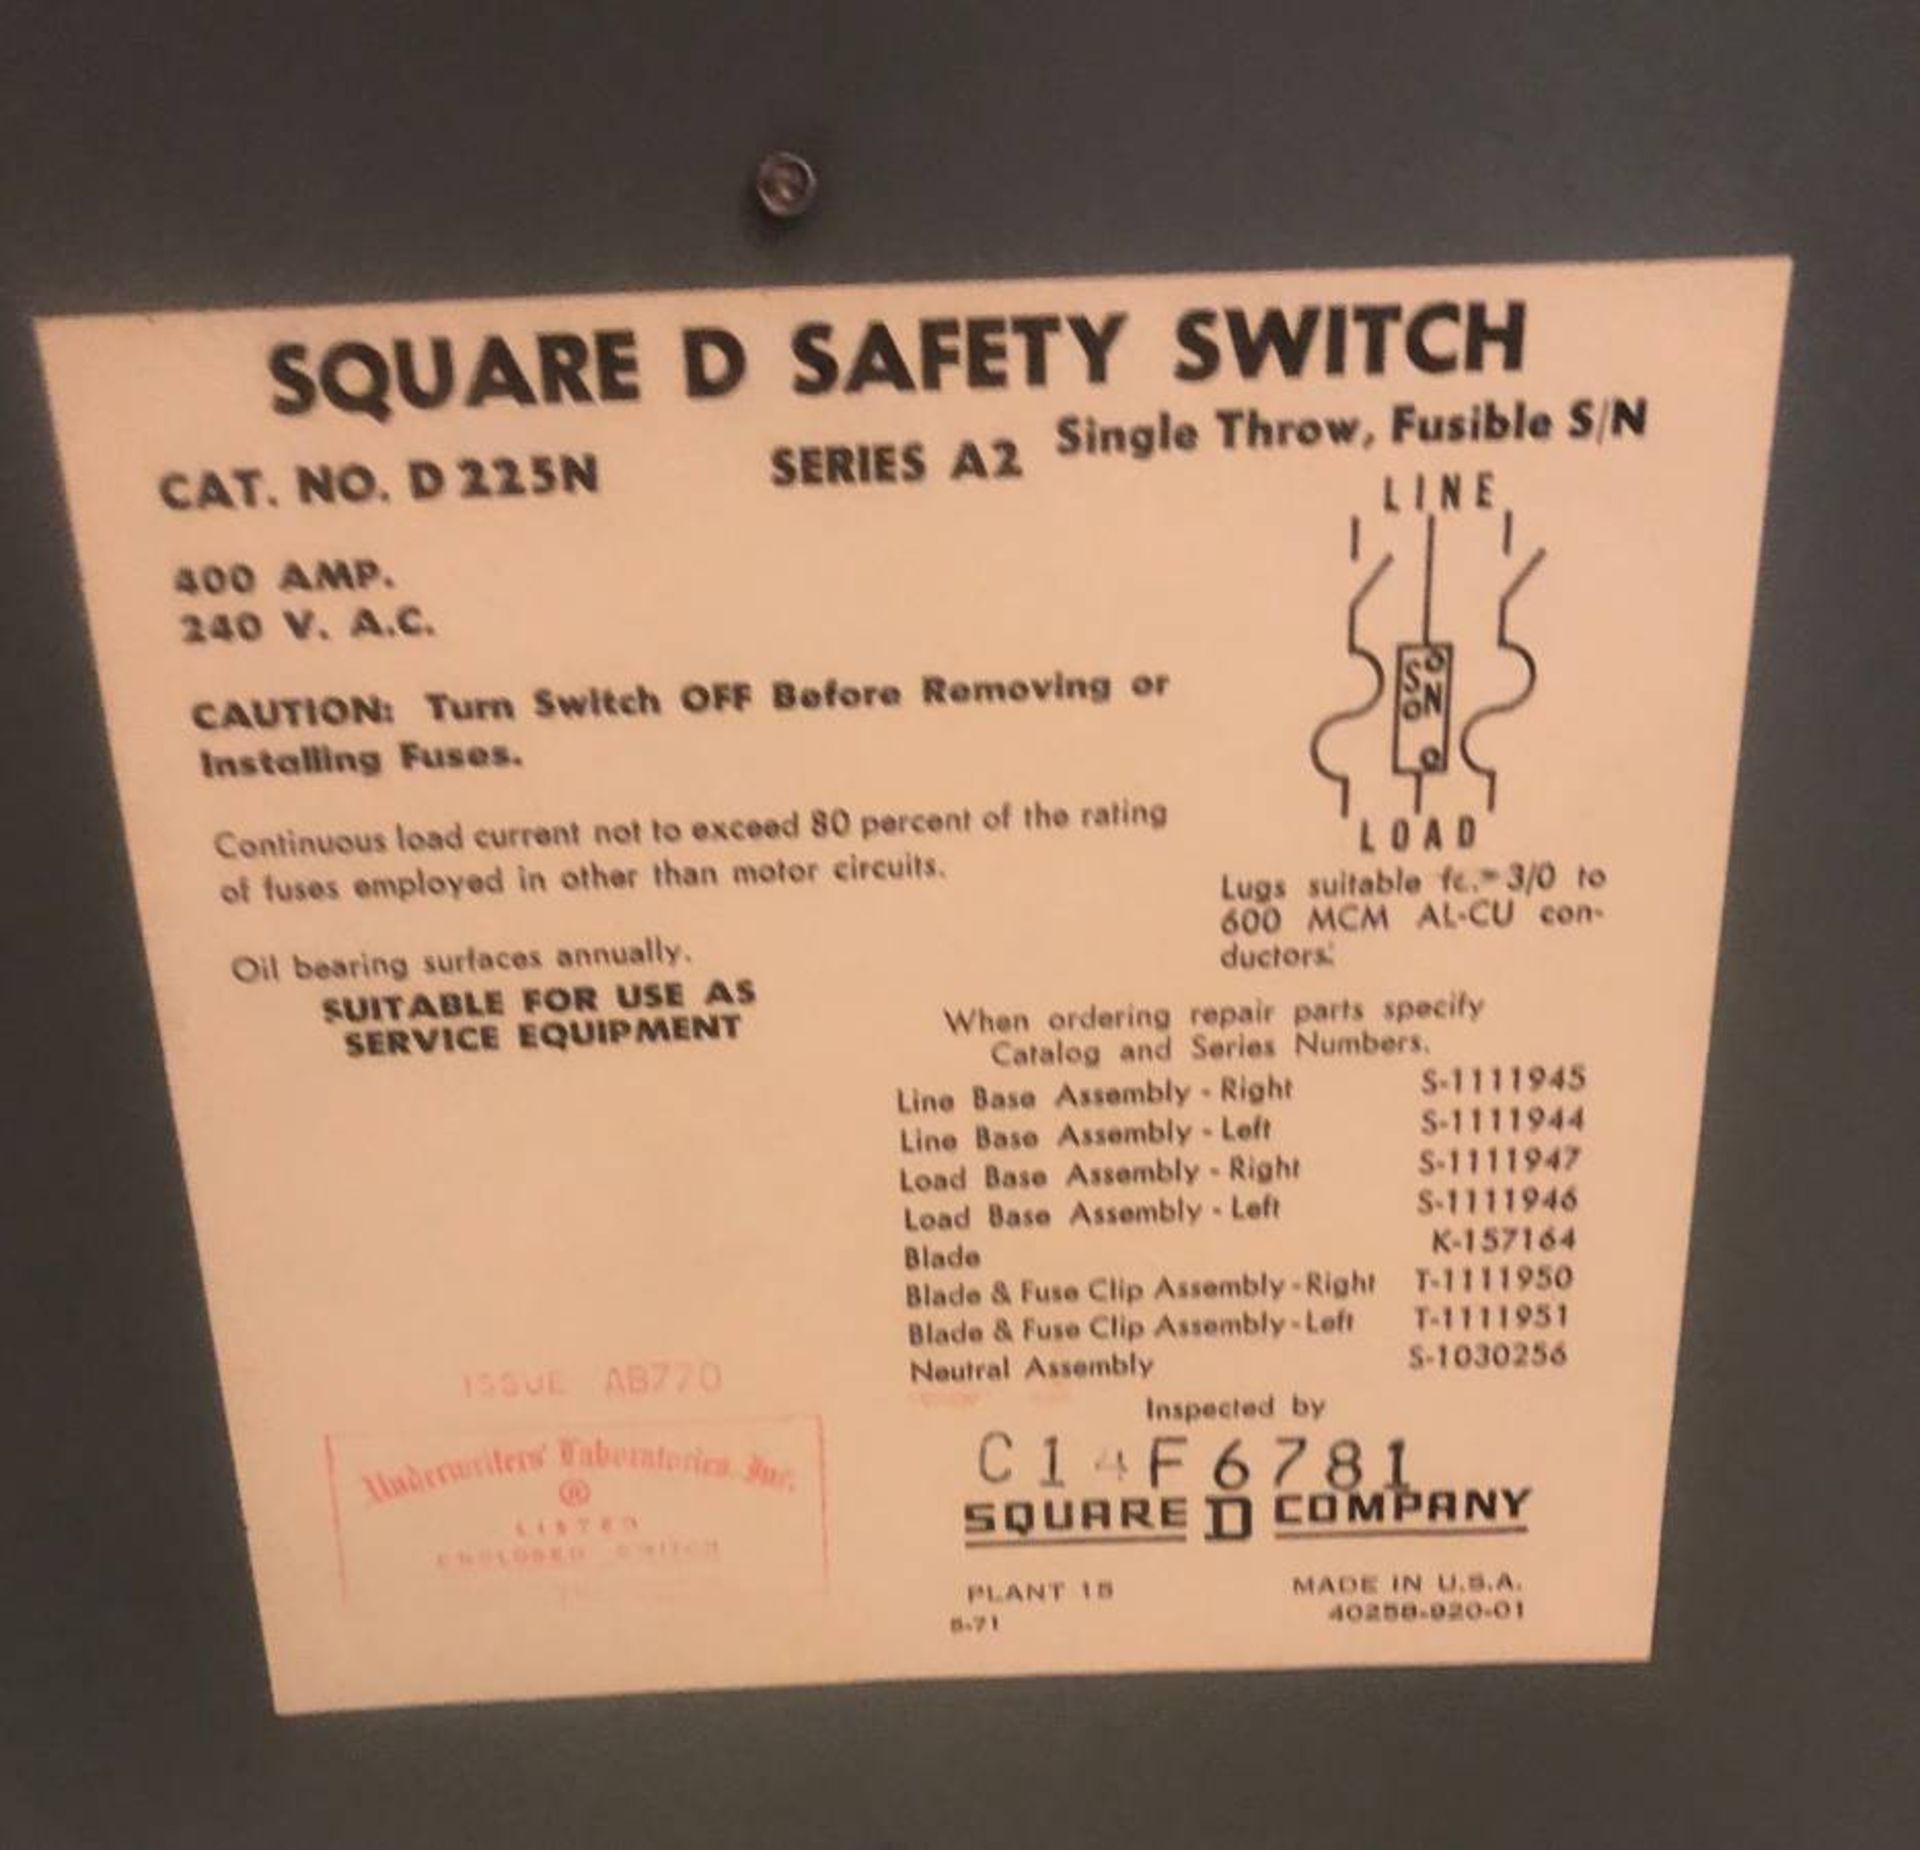 Square D D225N GD Safety Switch 400A 240V FUSIBLE $1500 new - Image 2 of 5